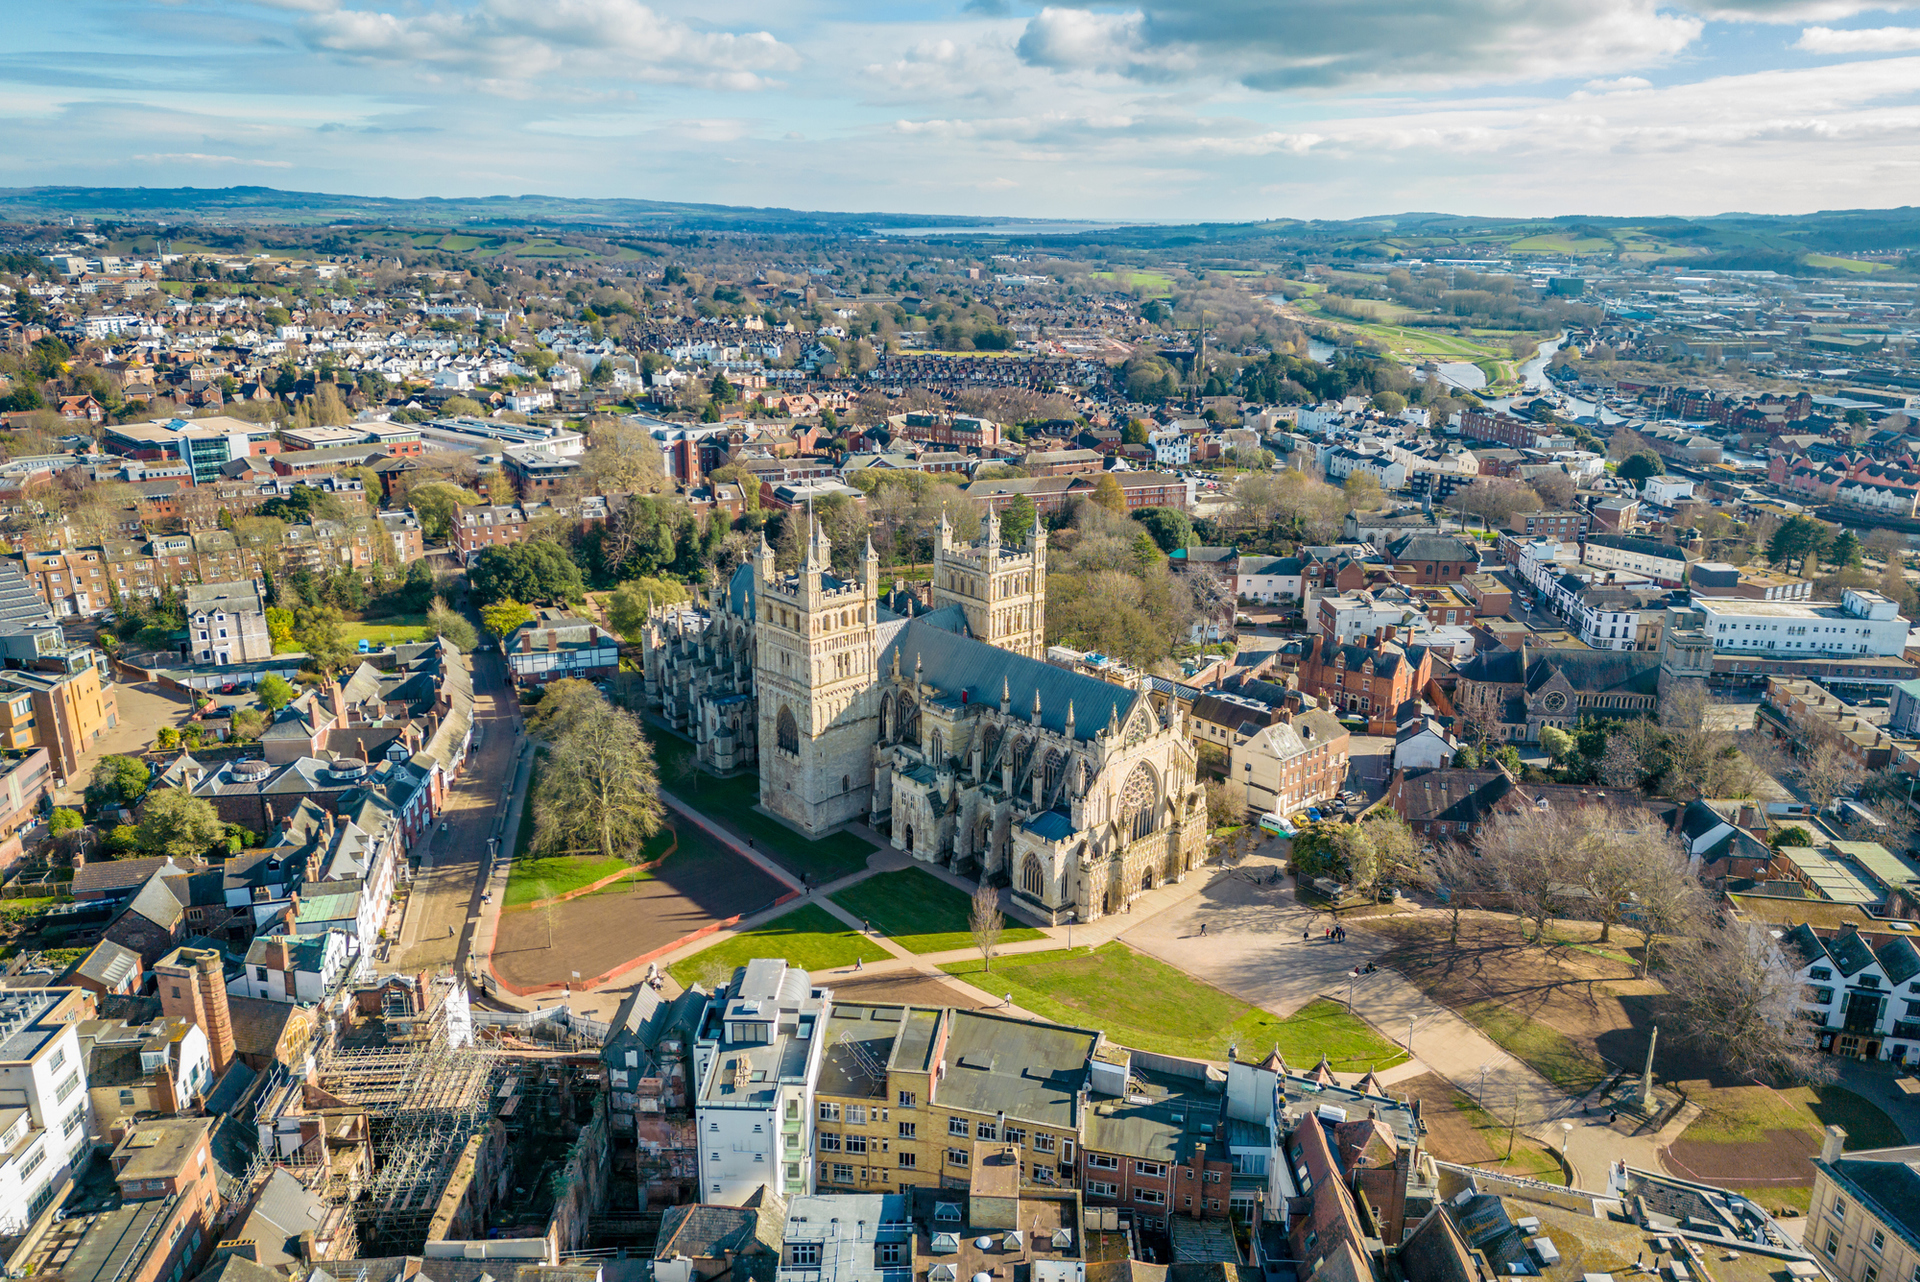 Exeter from a birds-eye point of view